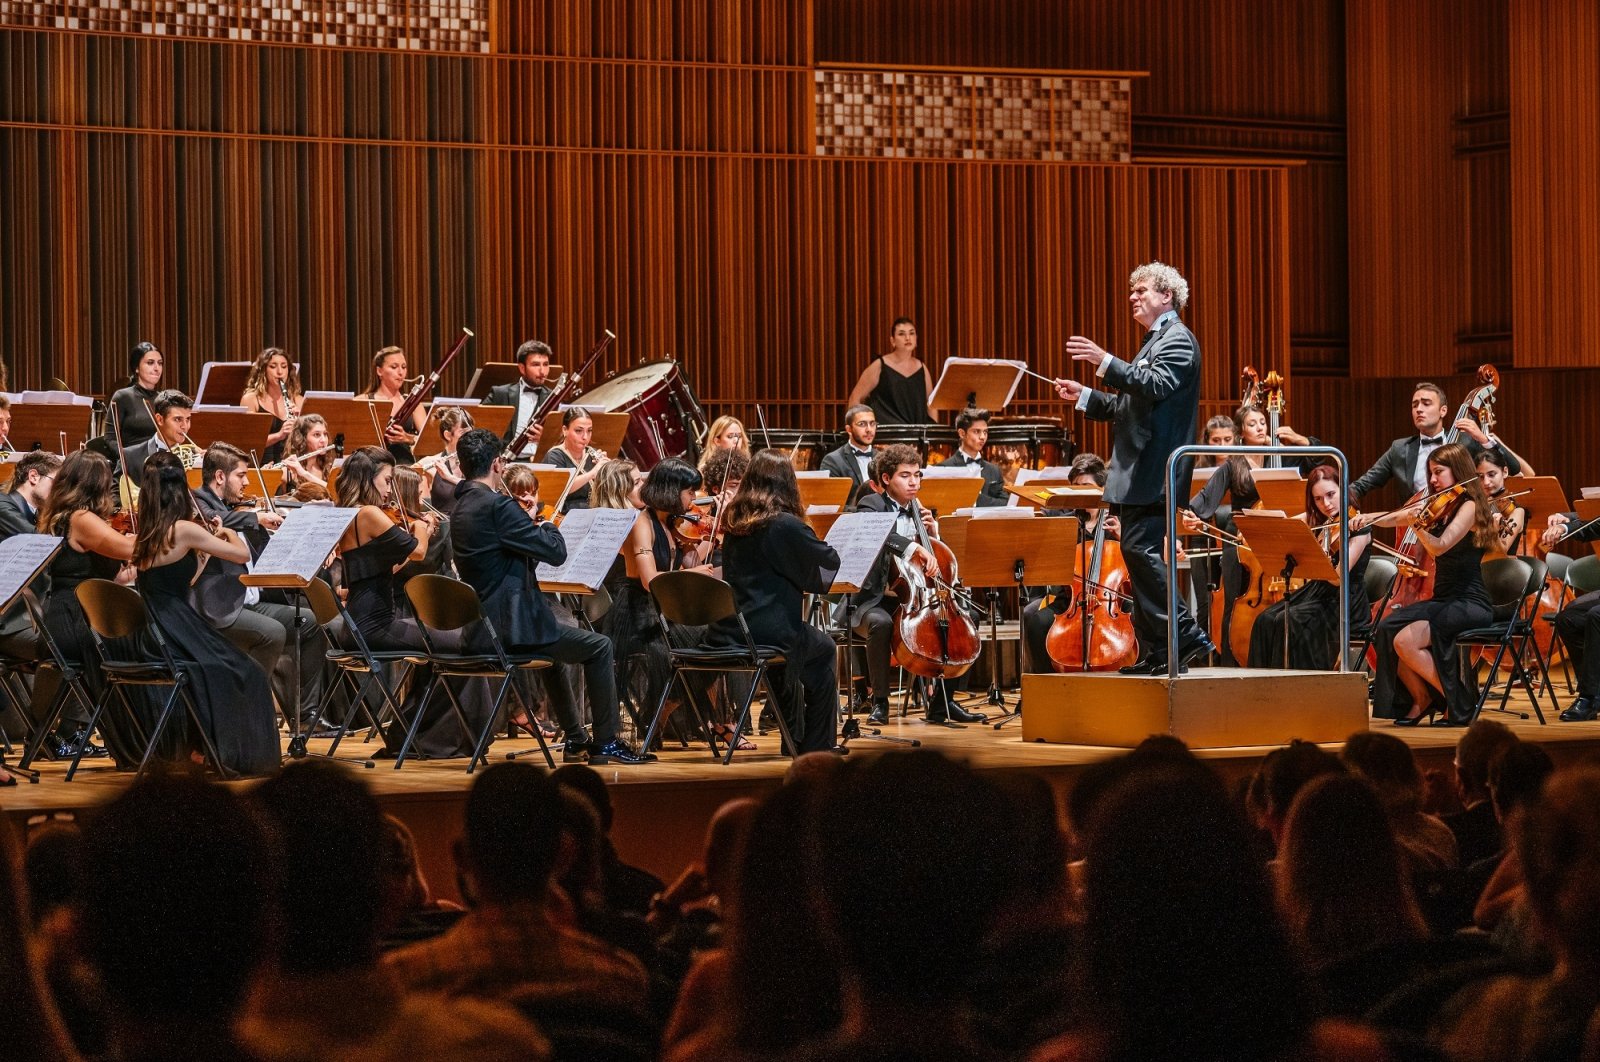 The Turkish National Youth Philharmonic Orchestra (TYPO) during a performance. (Photo courtesy of Sabancı Foundation)